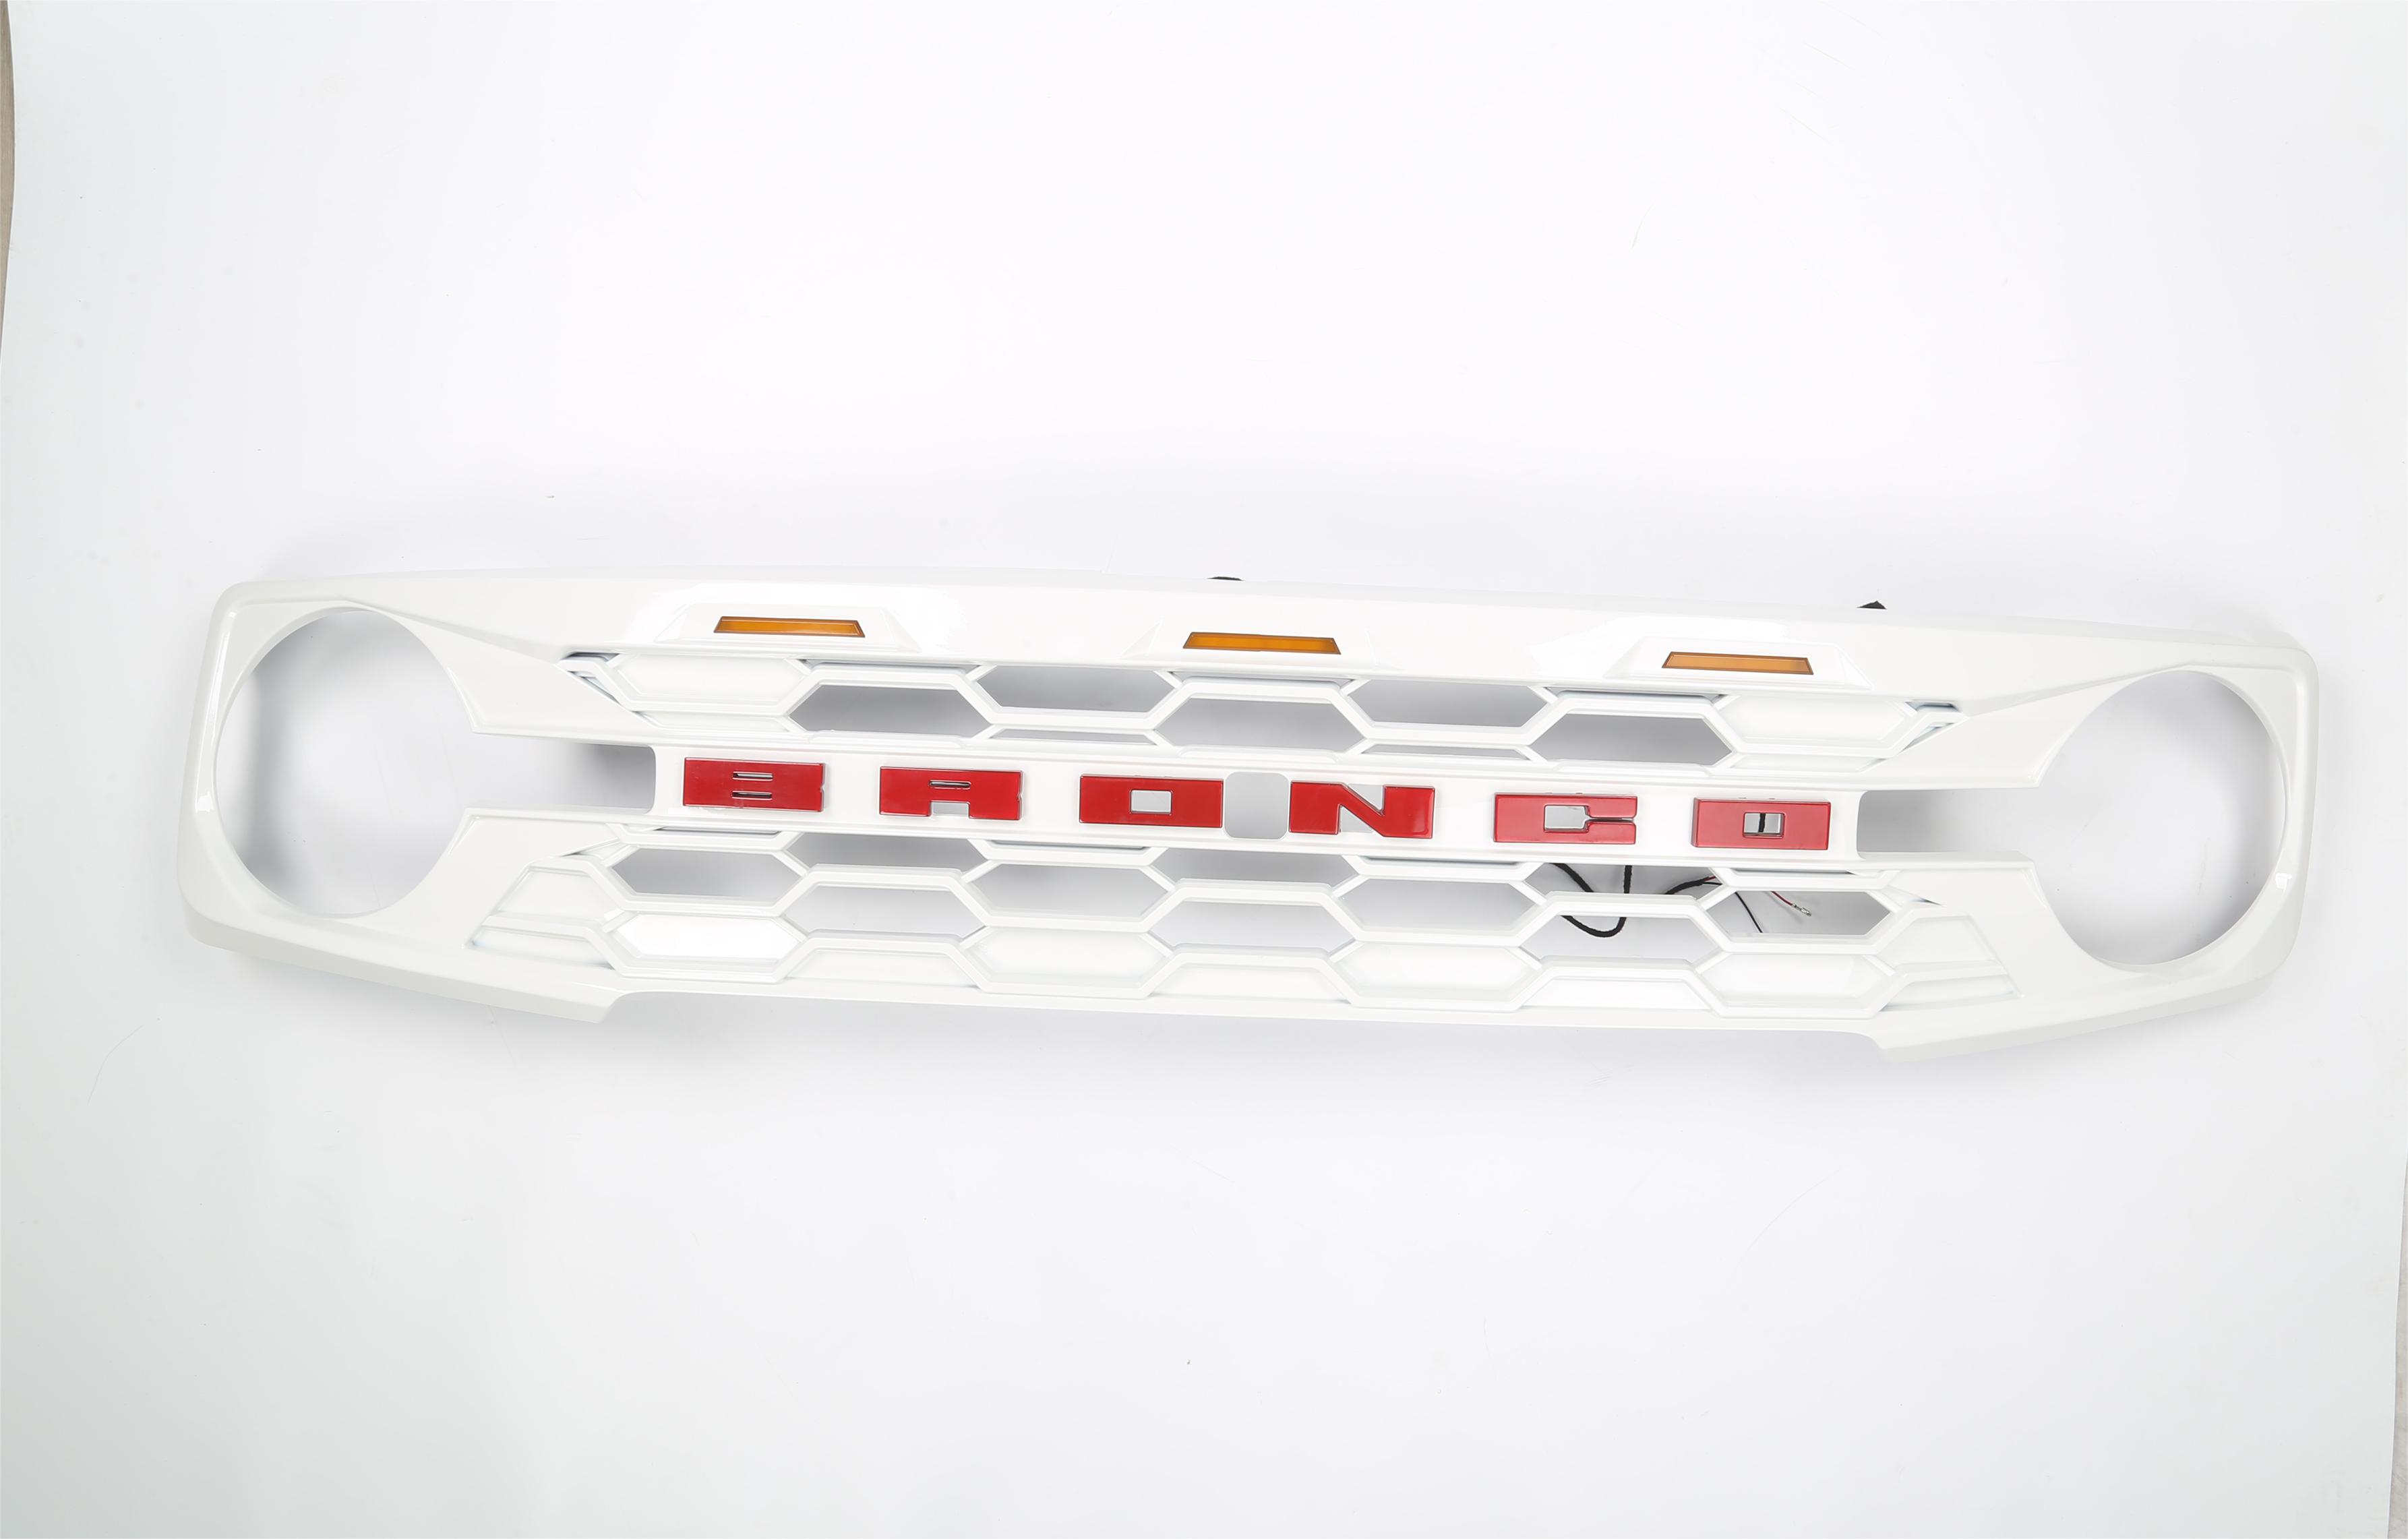 Ford Bronco Custom Grille - Sport Style w/ LED Lights - Gloss White Finish